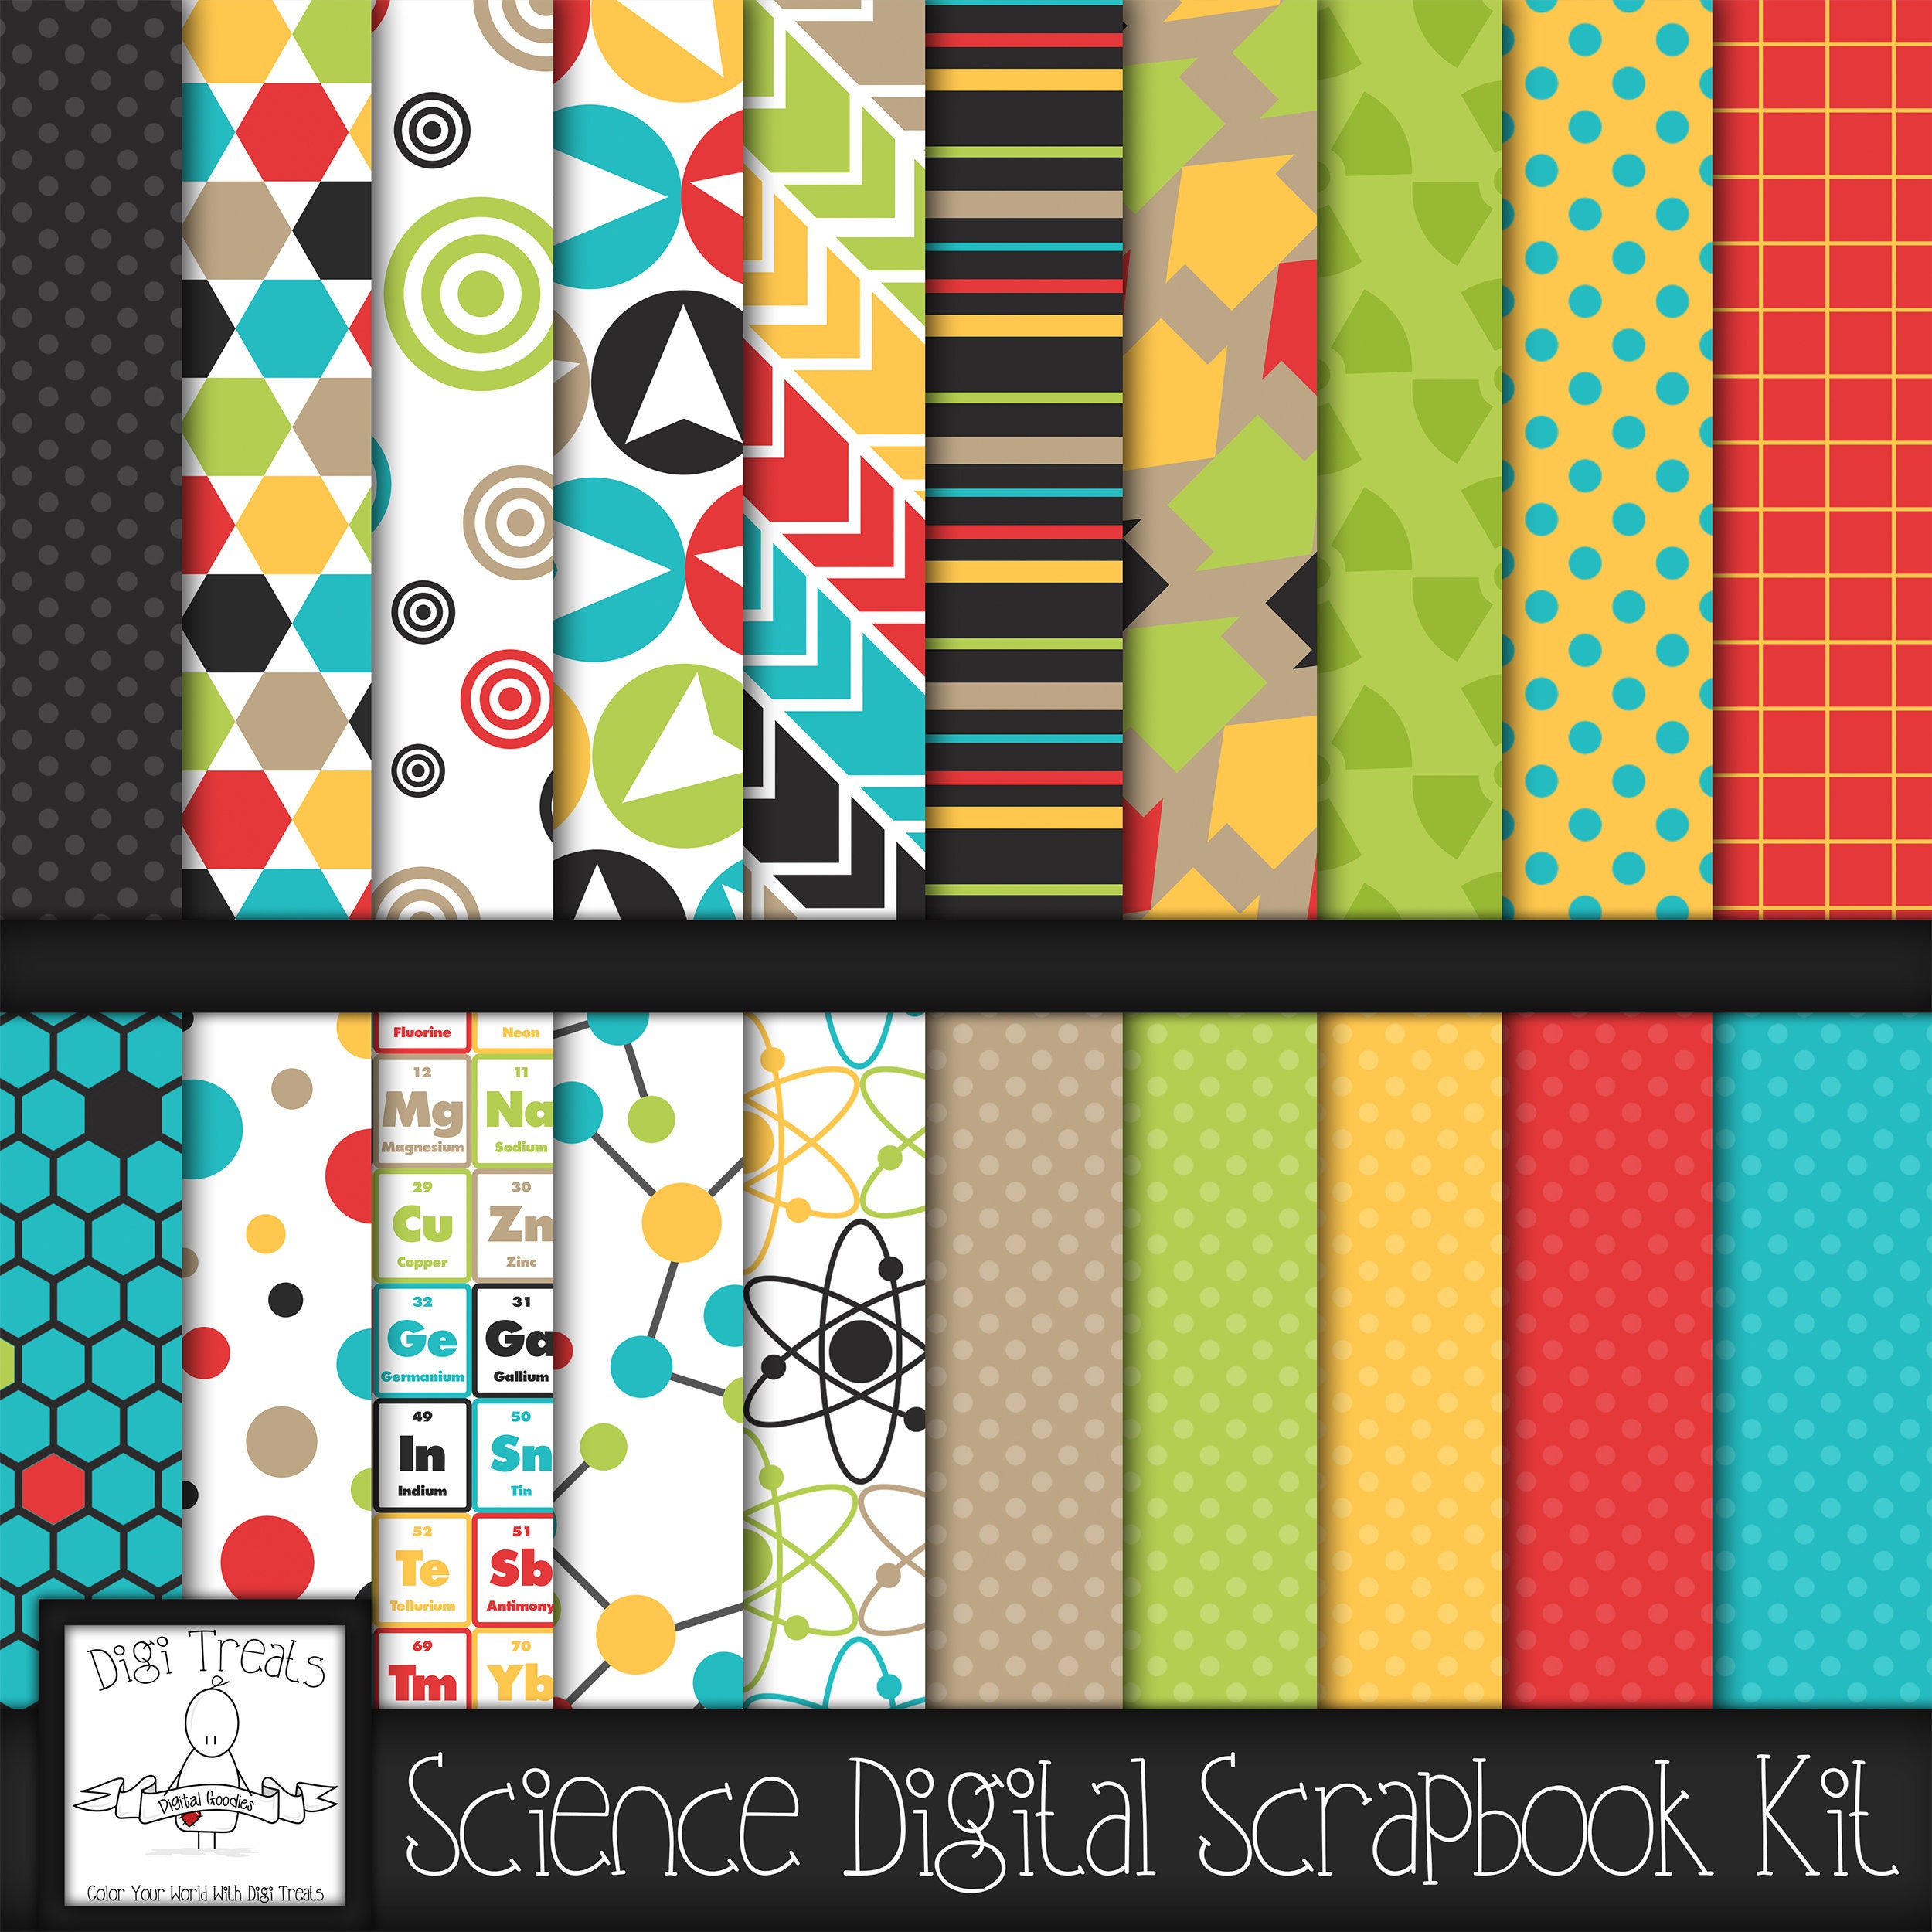 Boys Digital Scrapbook Kit. Boys, Teens Themed Scrapbook Kit, Digital  Papers, Clip Art, Word Tags and More. INSTANT DOWNLOAD -  Sweden